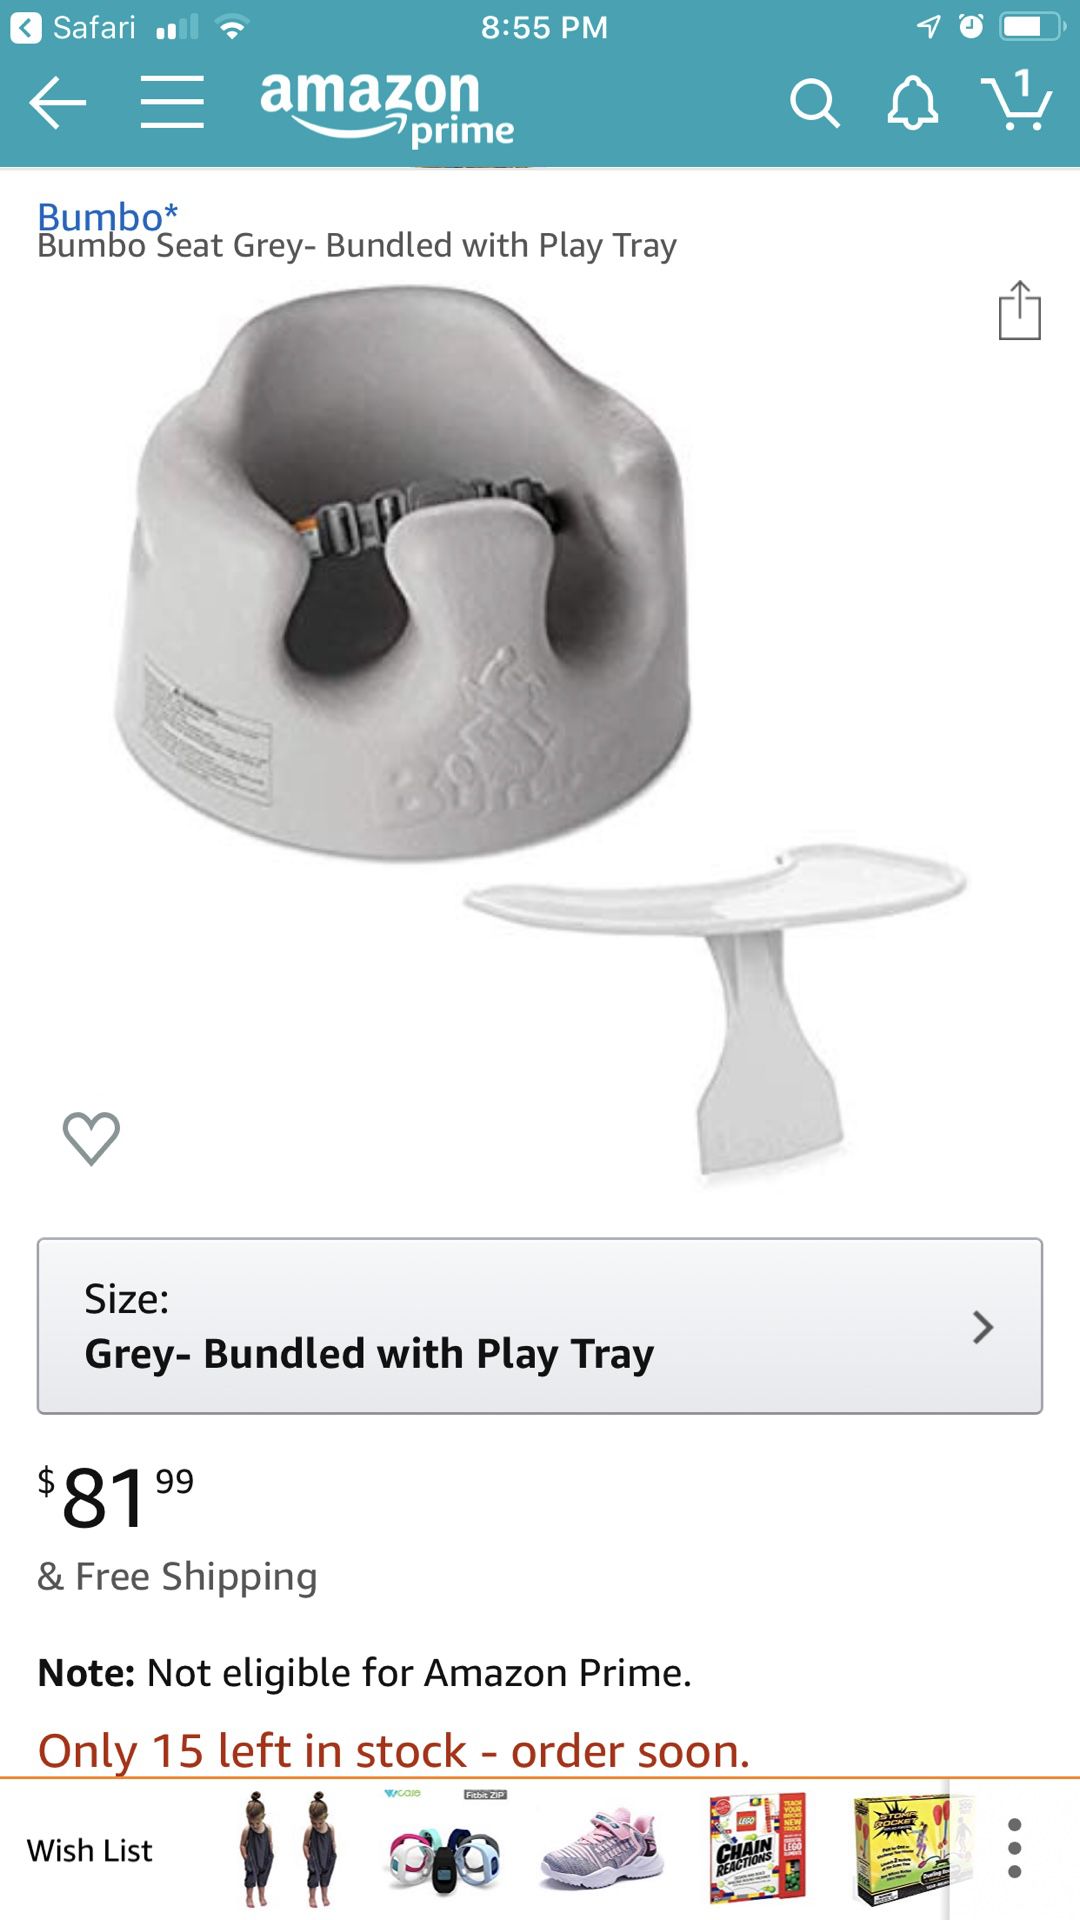 Red Bumbo w/out Play Tray